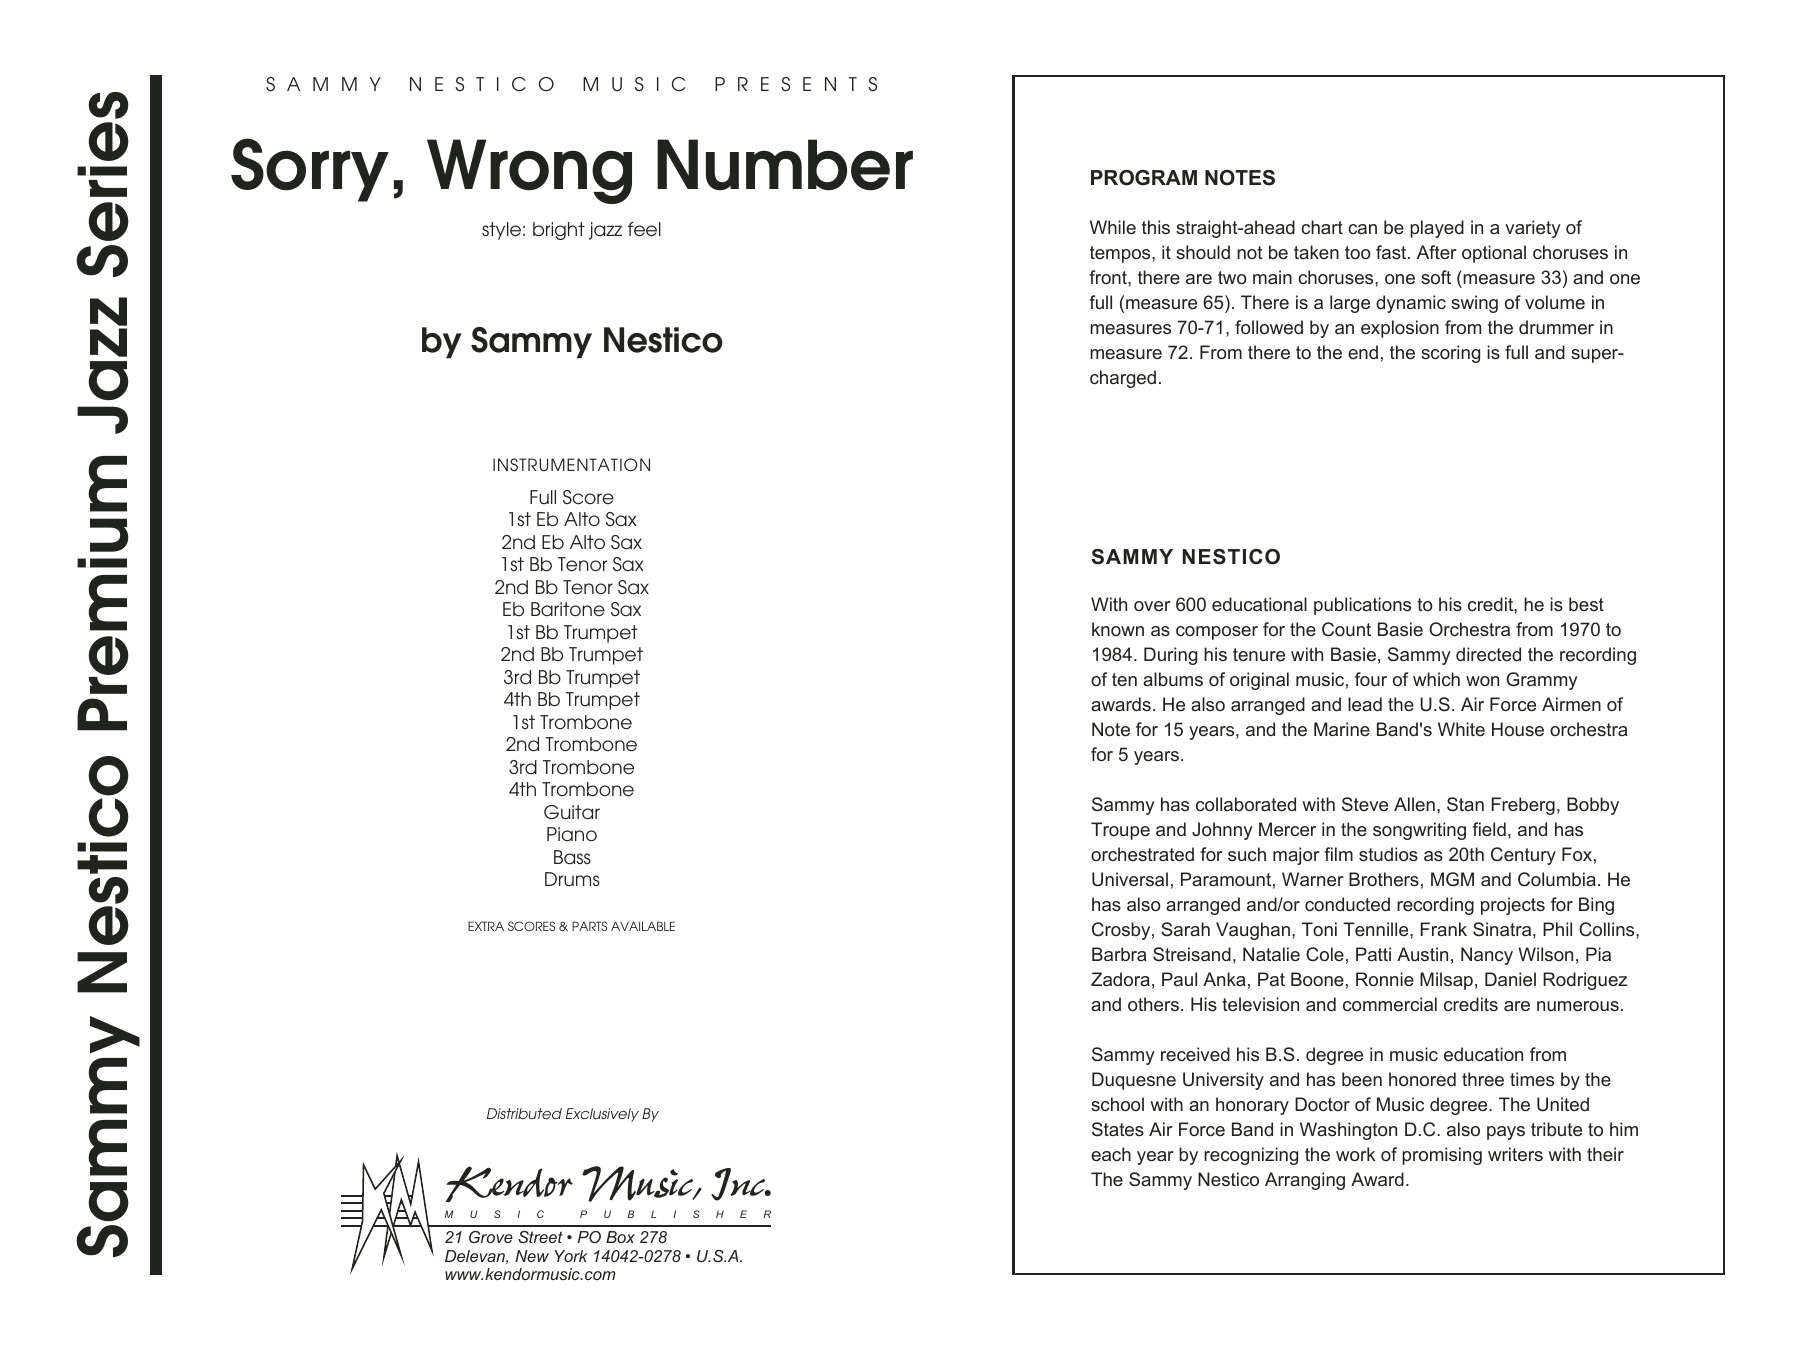 Download Sammy Nestico Sorry, Wrong Number - Full Score Sheet Music